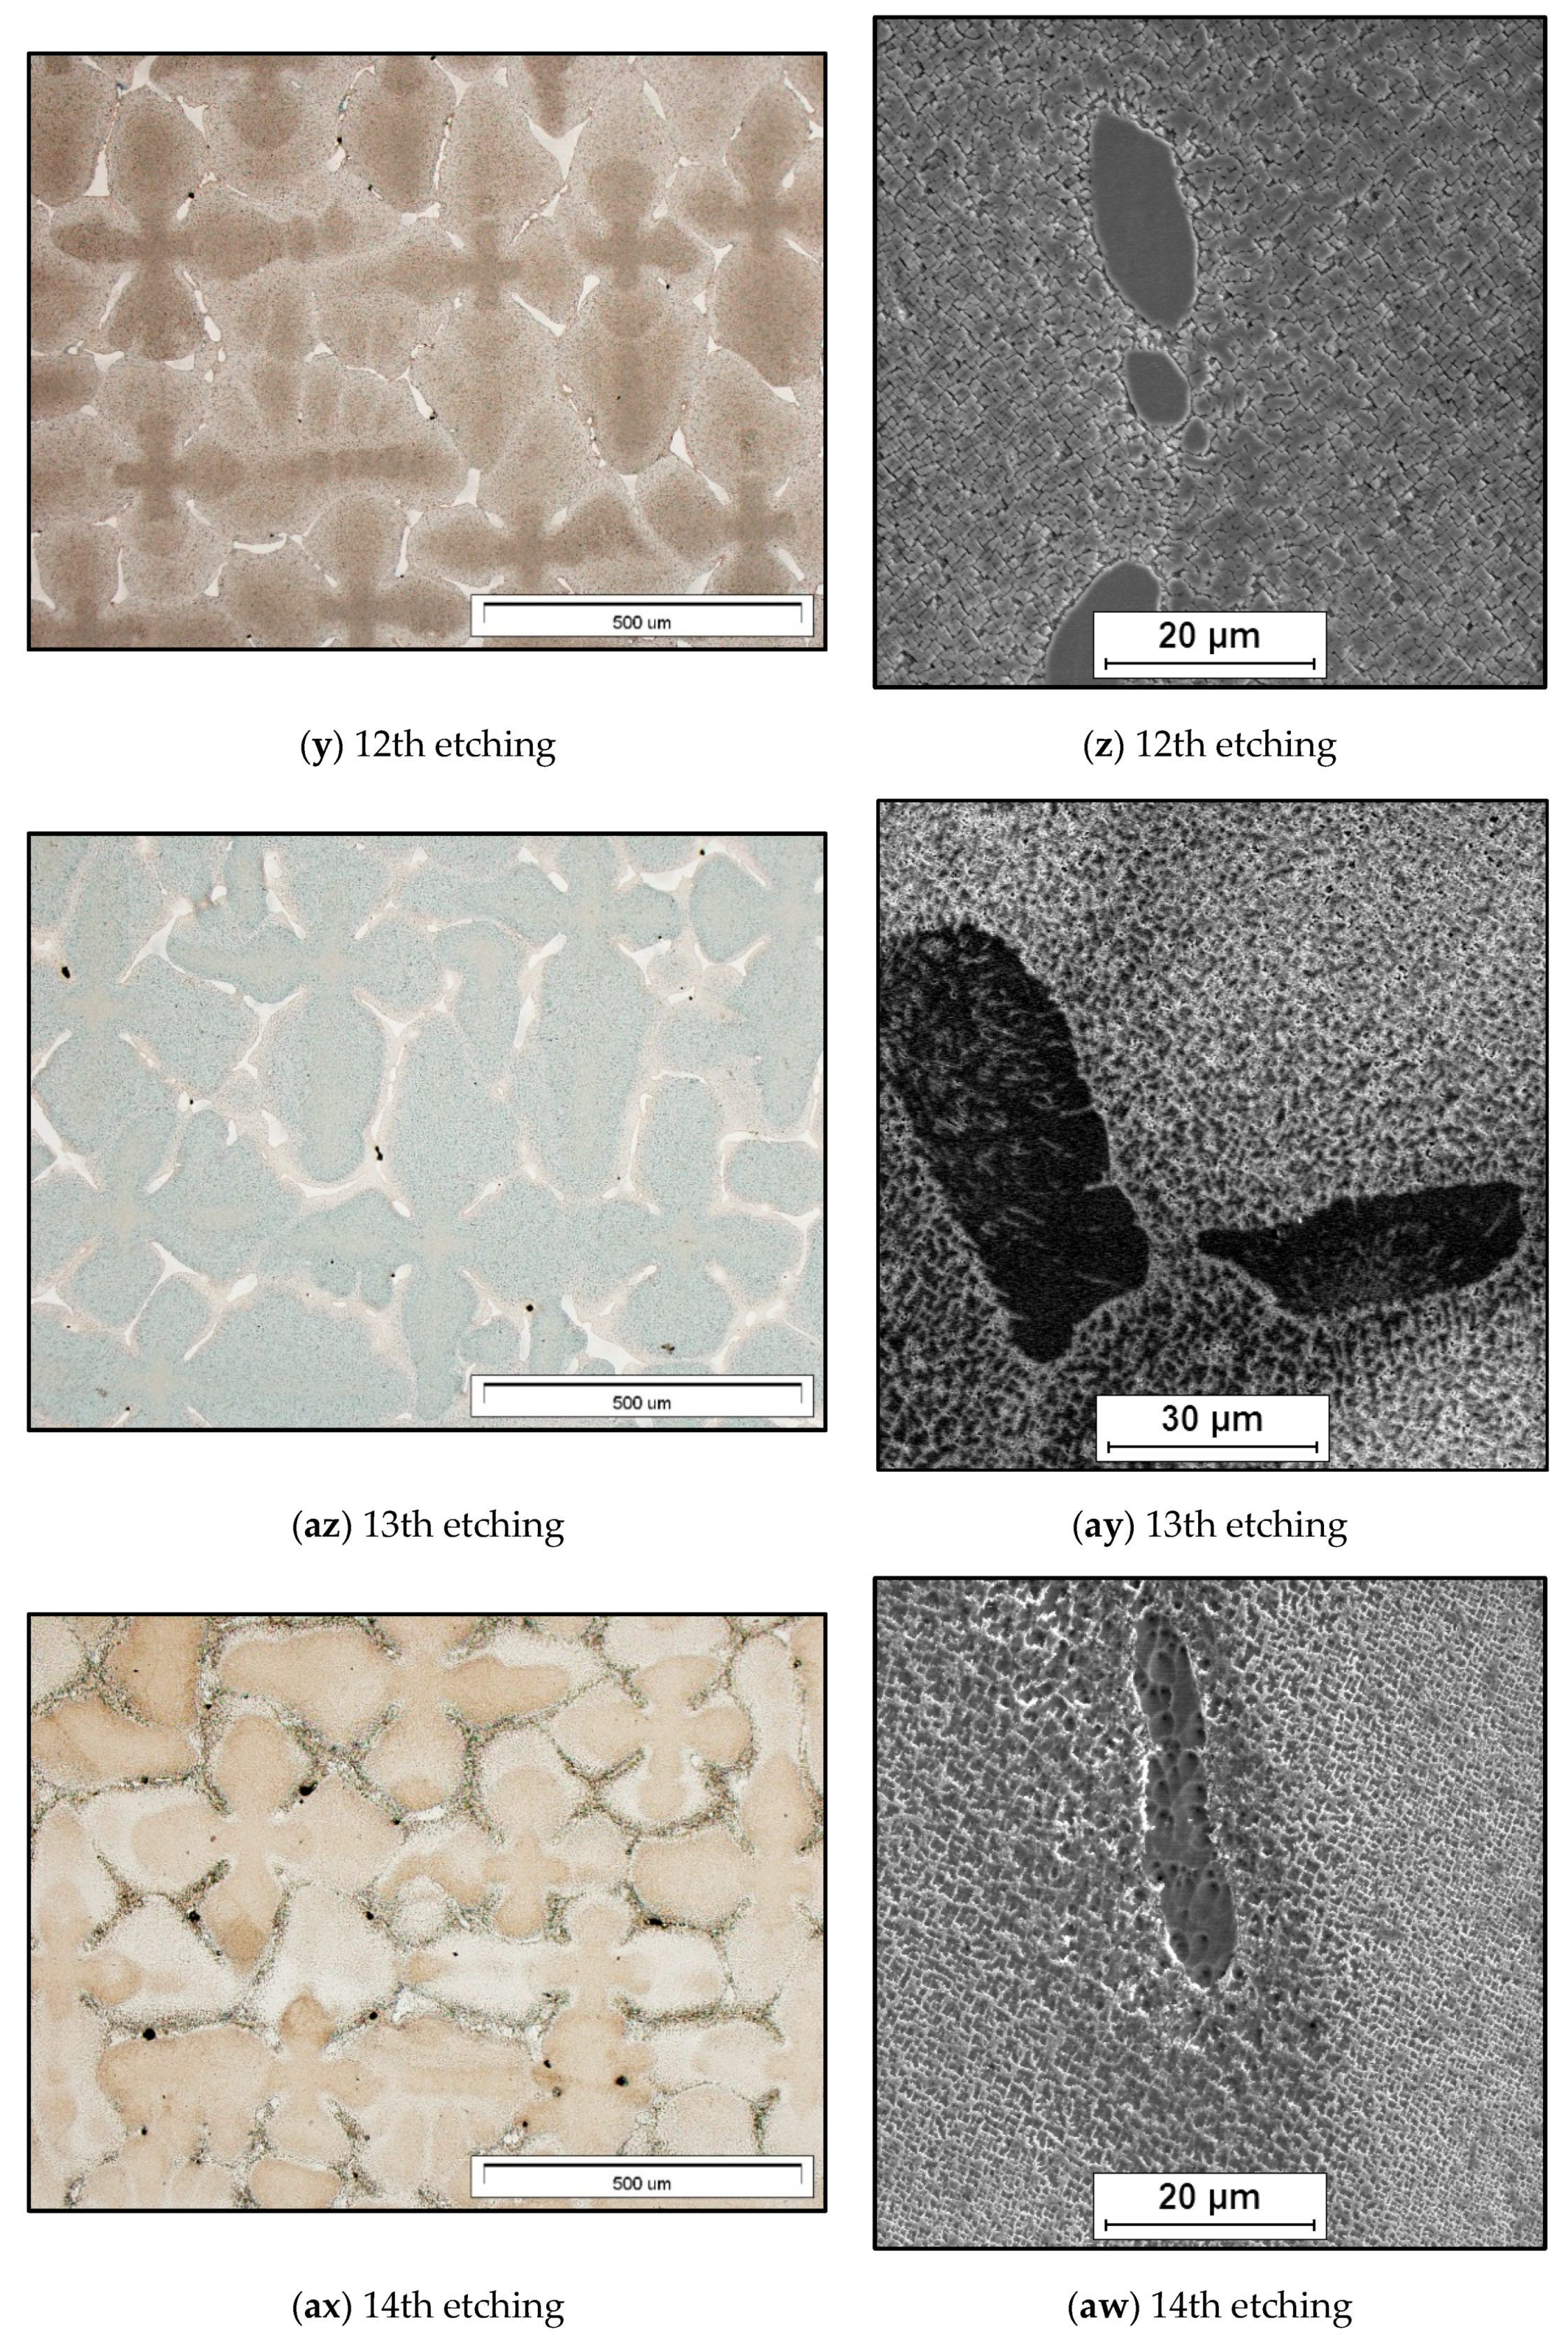 Materials Free Full Text Methodology For Revealing The Phases And Microstructural Constituents Of The Cmsx 4 Nickel Based Superalloy Implicating Their Computer Aided Detection For Image Analysis Html